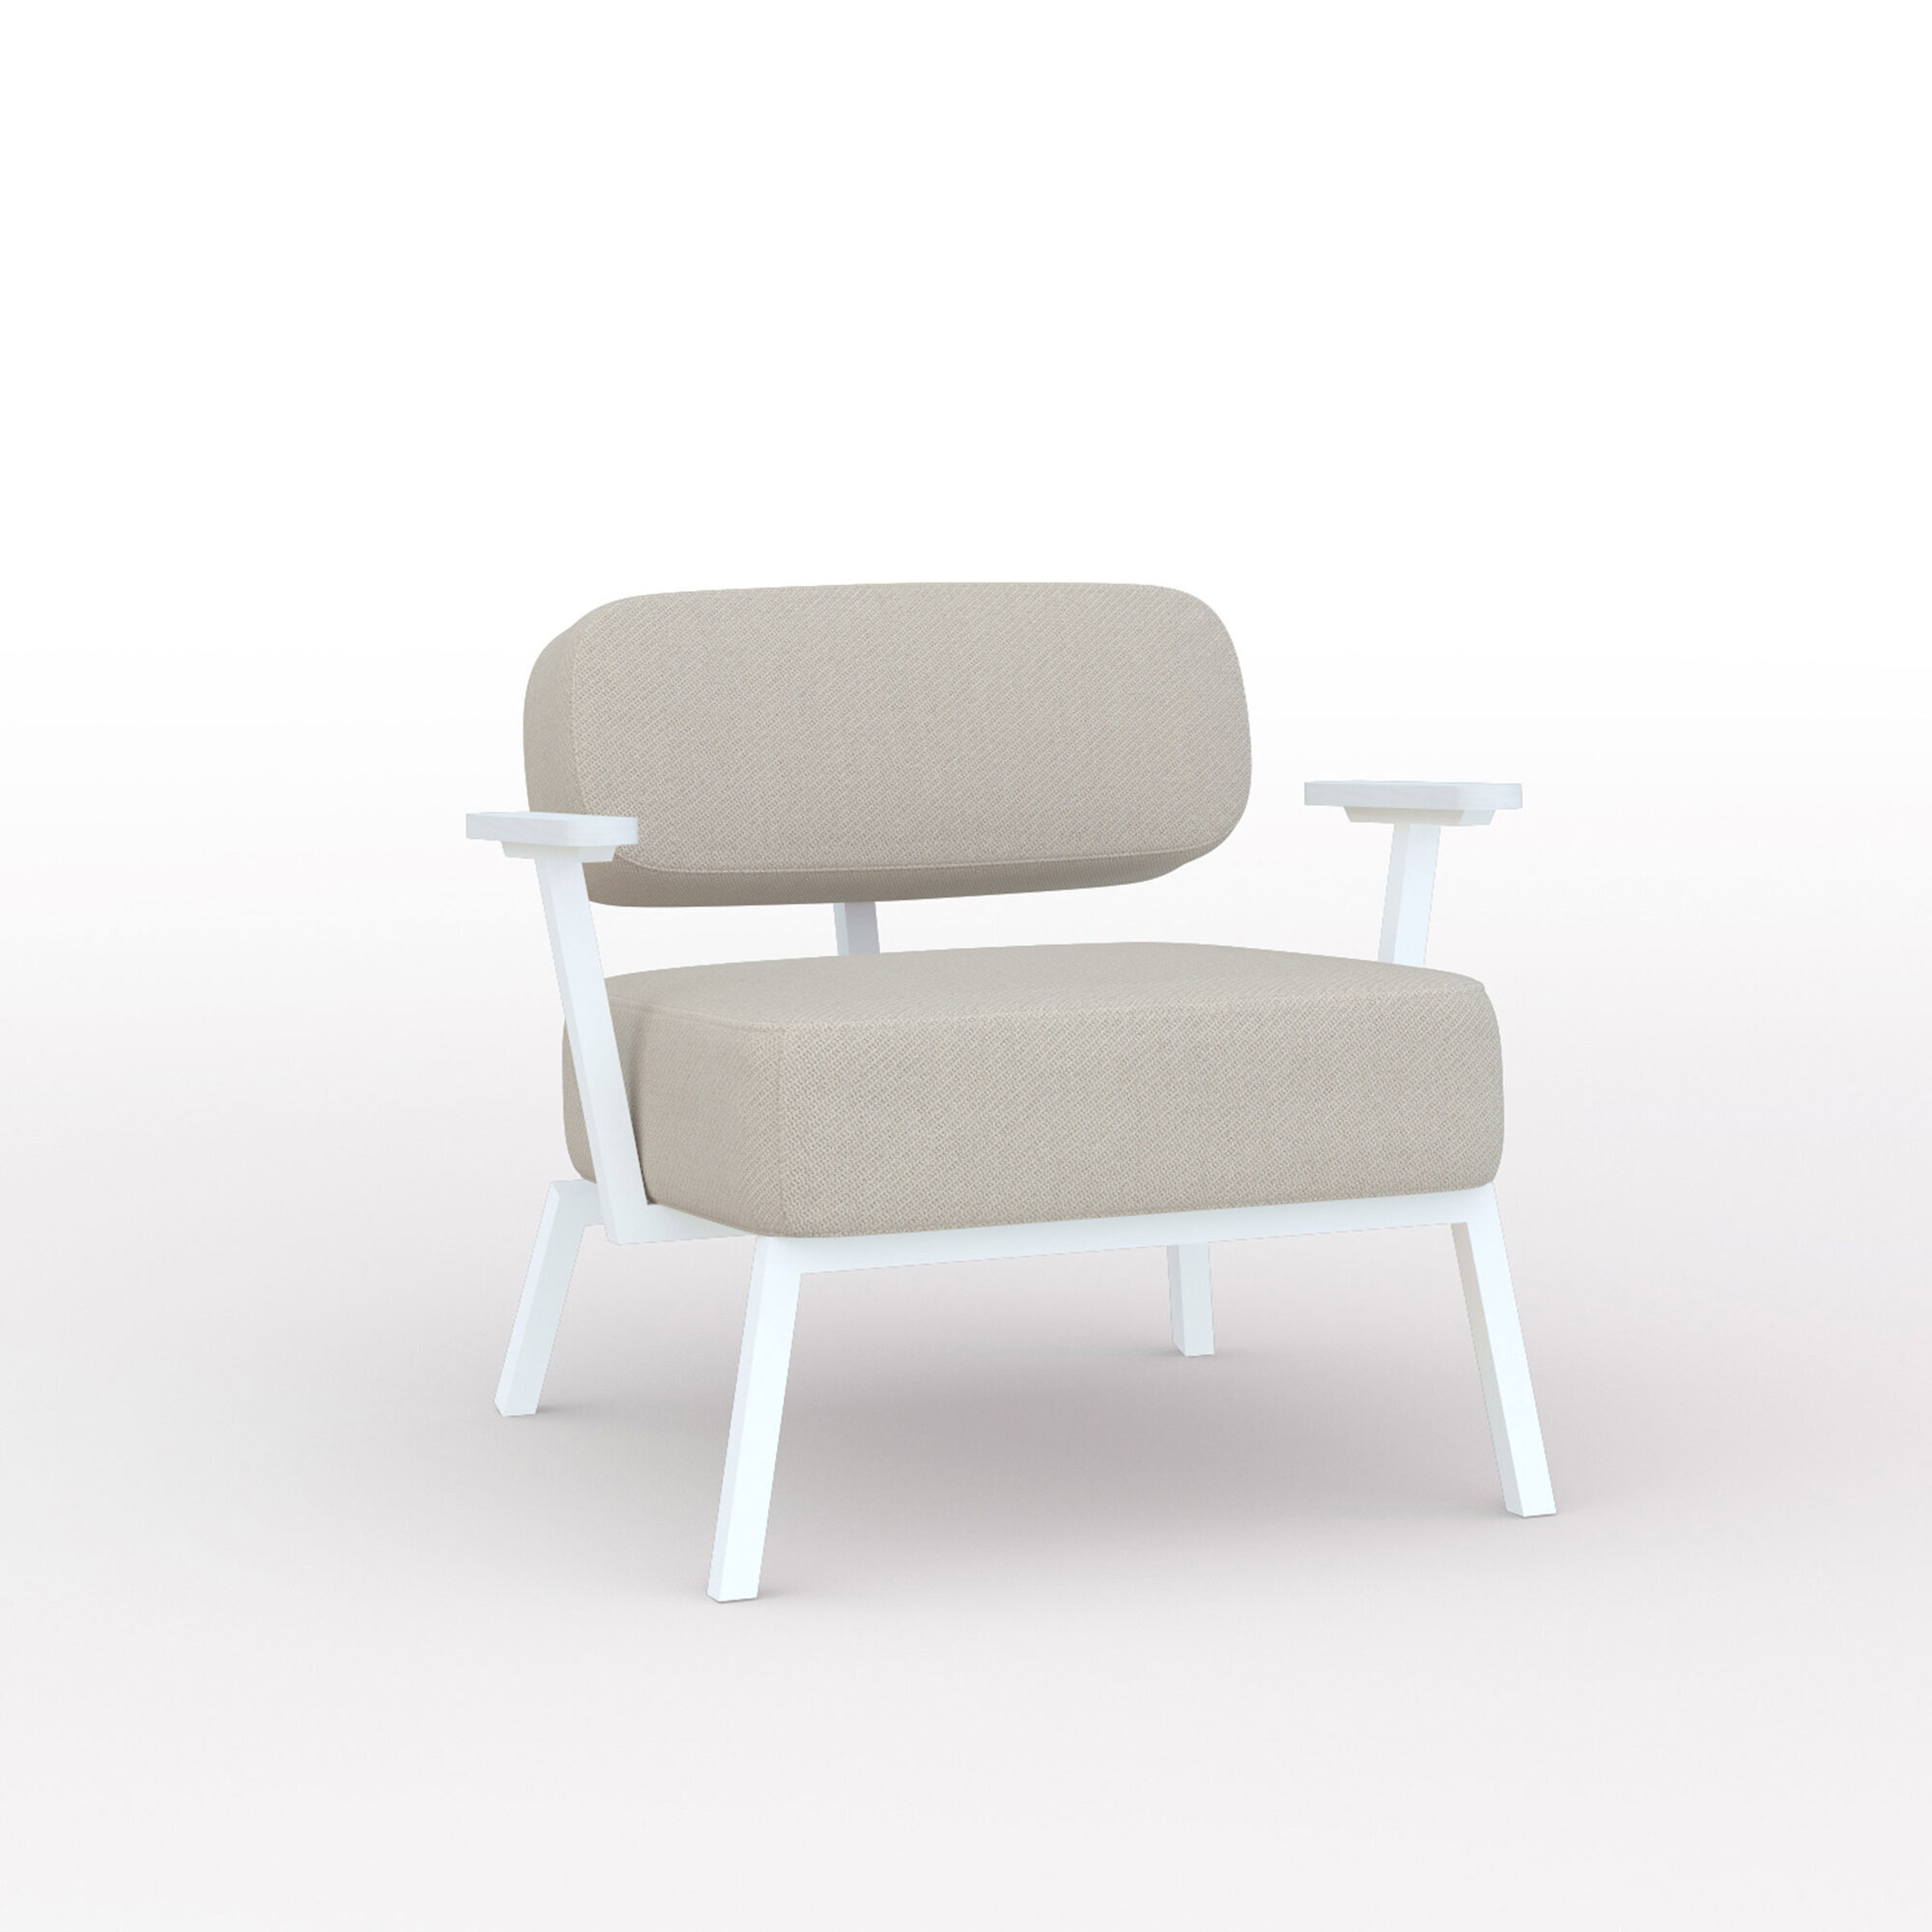 Design modern sofa | Ode lounge chair 1 seater with armrest  twillweave 230 | Studio HENK| Listing_image